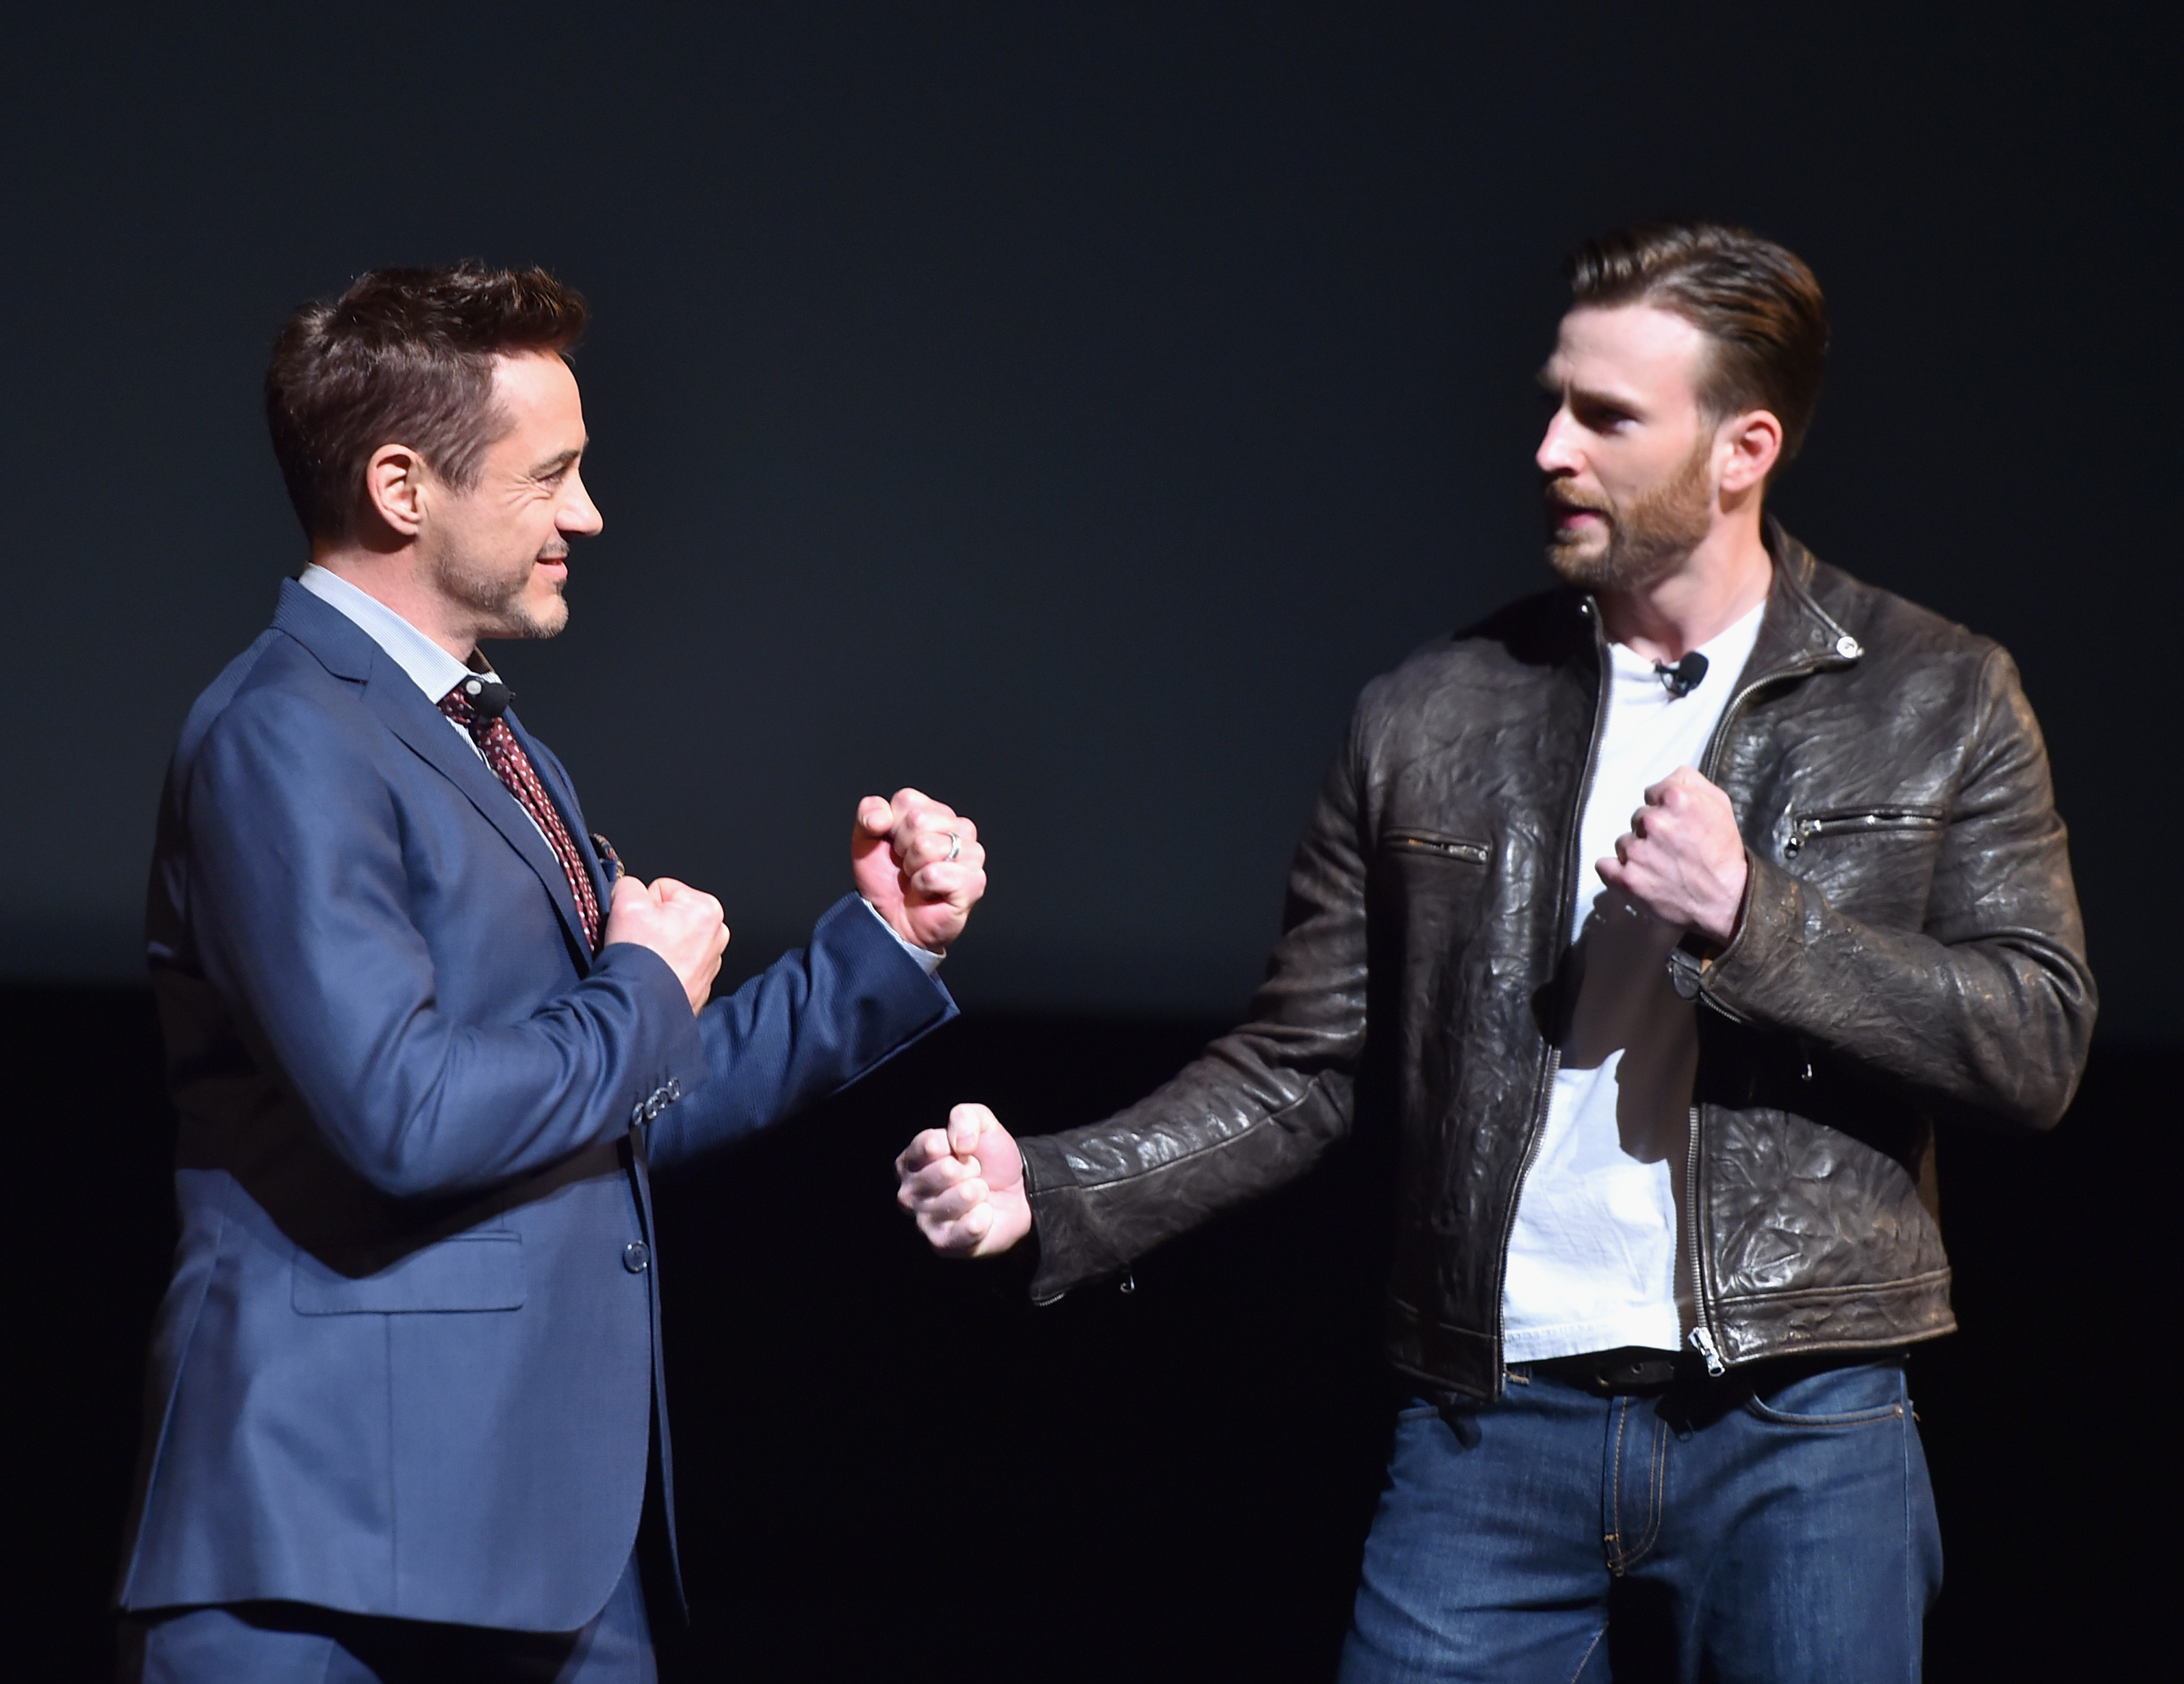 Iron Man and Captain America are ready to duke it out!